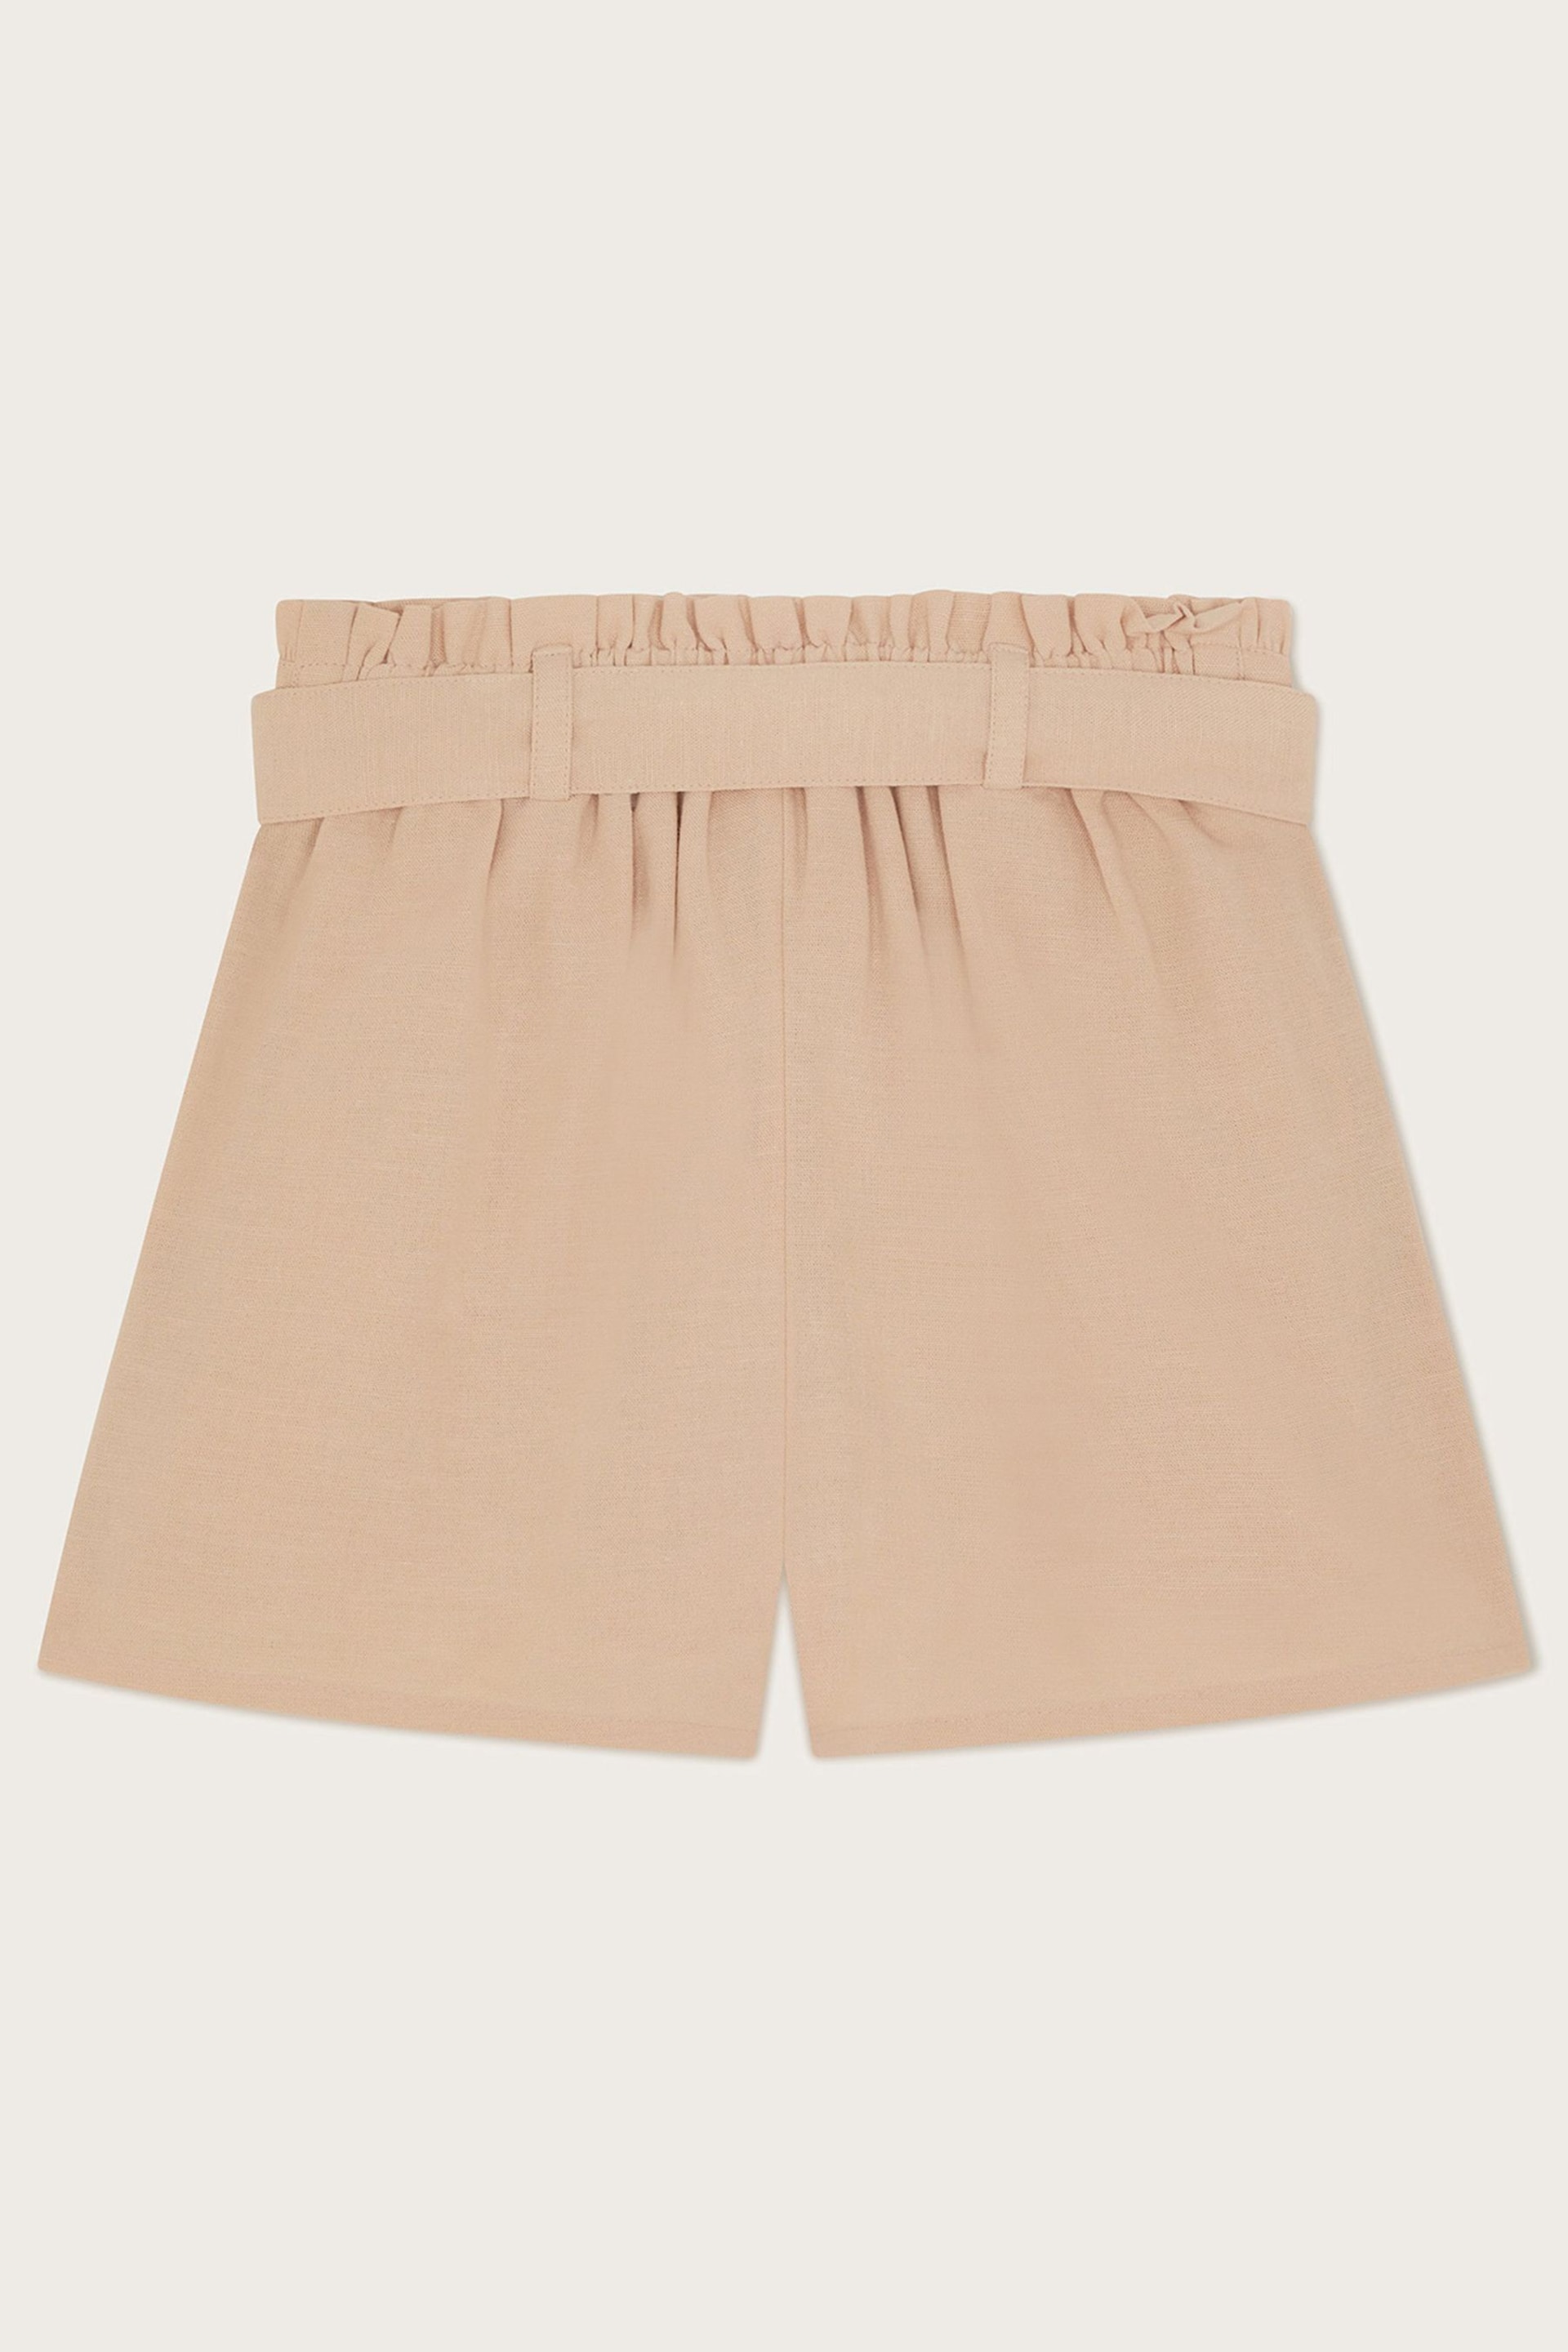 Monsoon Natural Embroidered Paperbag Shorts - Image 2 of 3